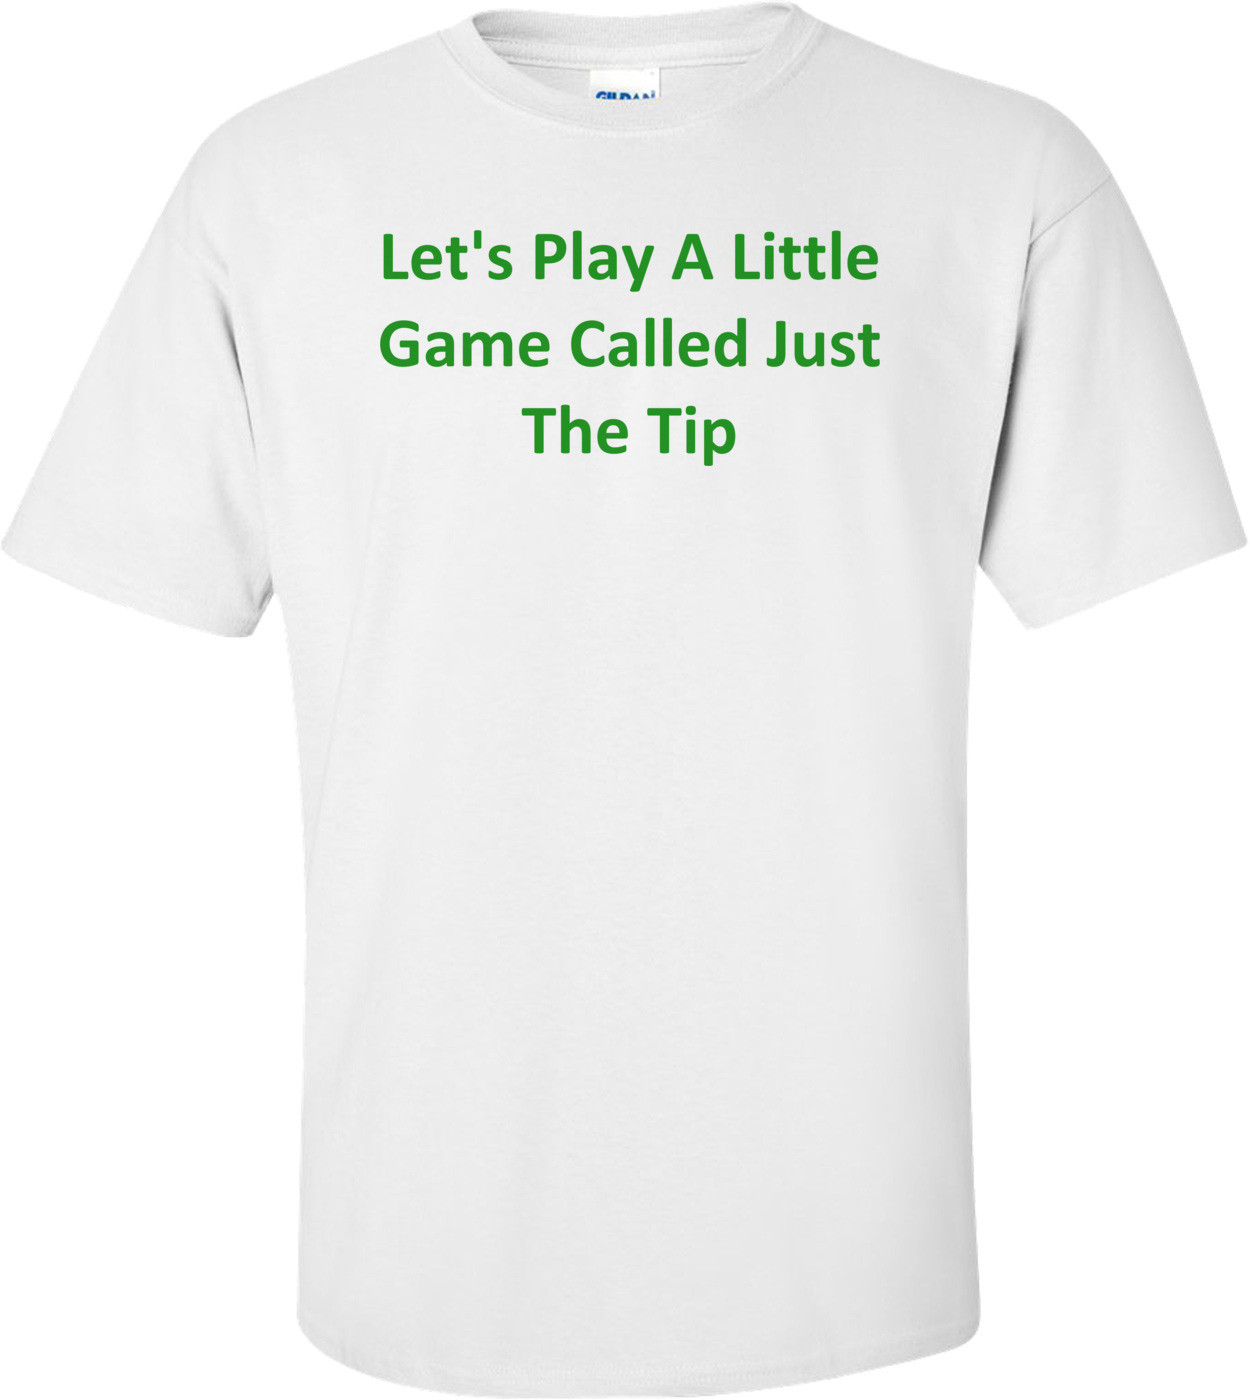 Let's Play A Little Game Called Just The Tip T-Shirt